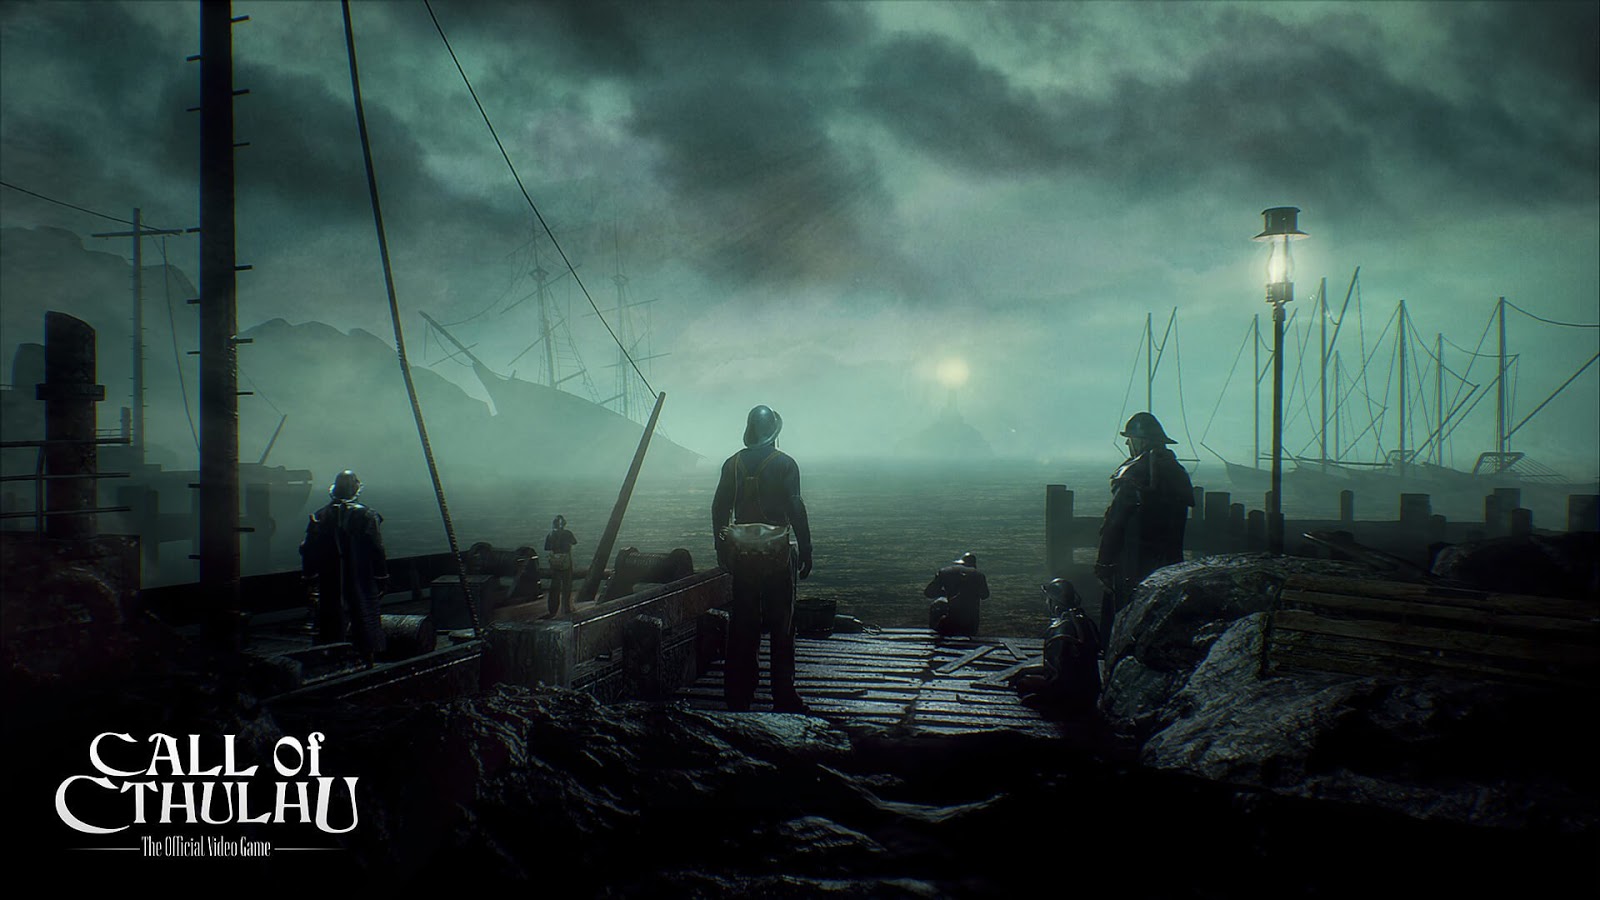 Call Of Cthulhu Android Wallpaper - Call Of Cthulhu The Official Video Game - HD Wallpaper 